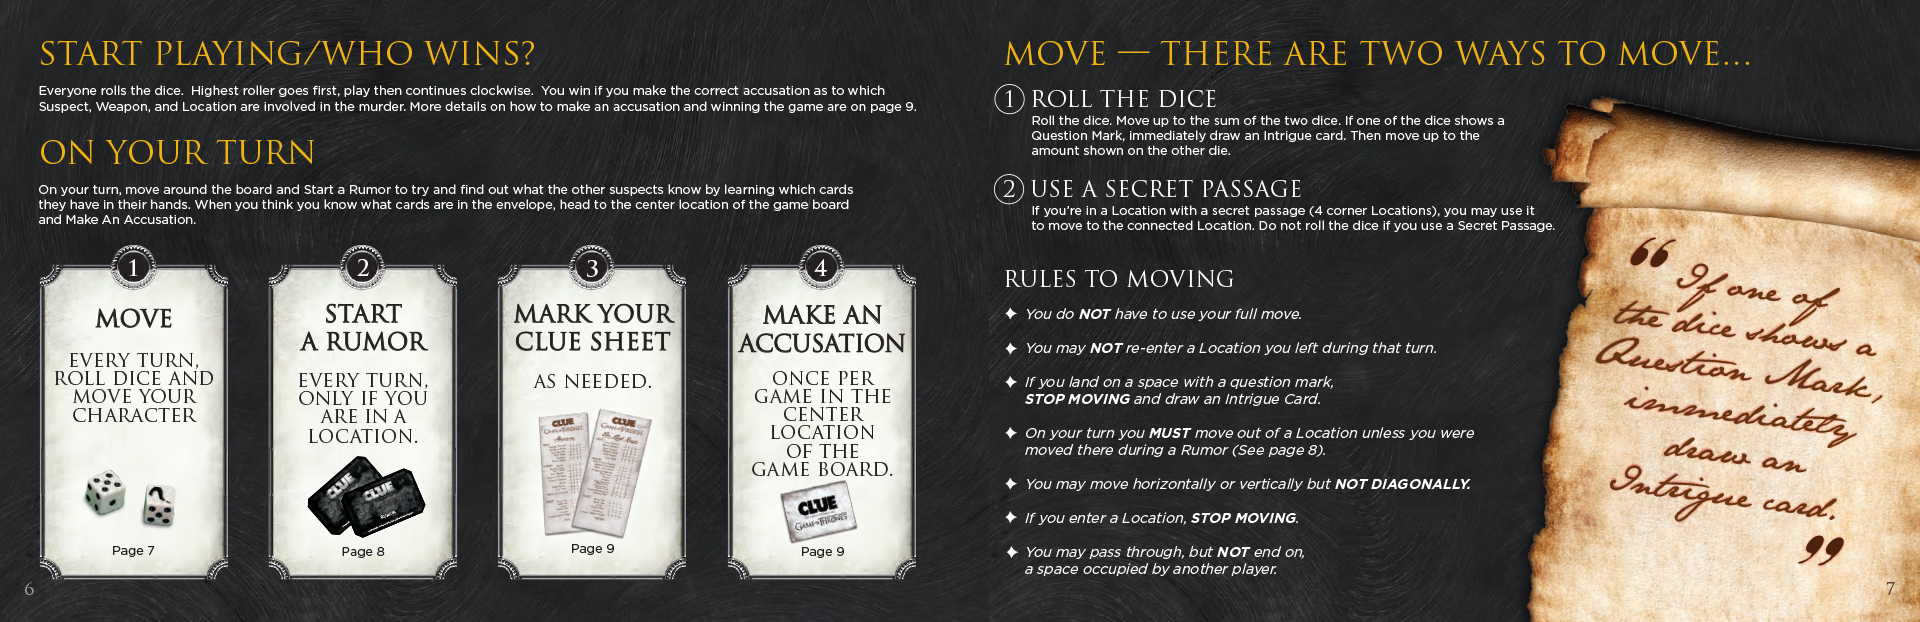 Game of Thrones Clue Rules